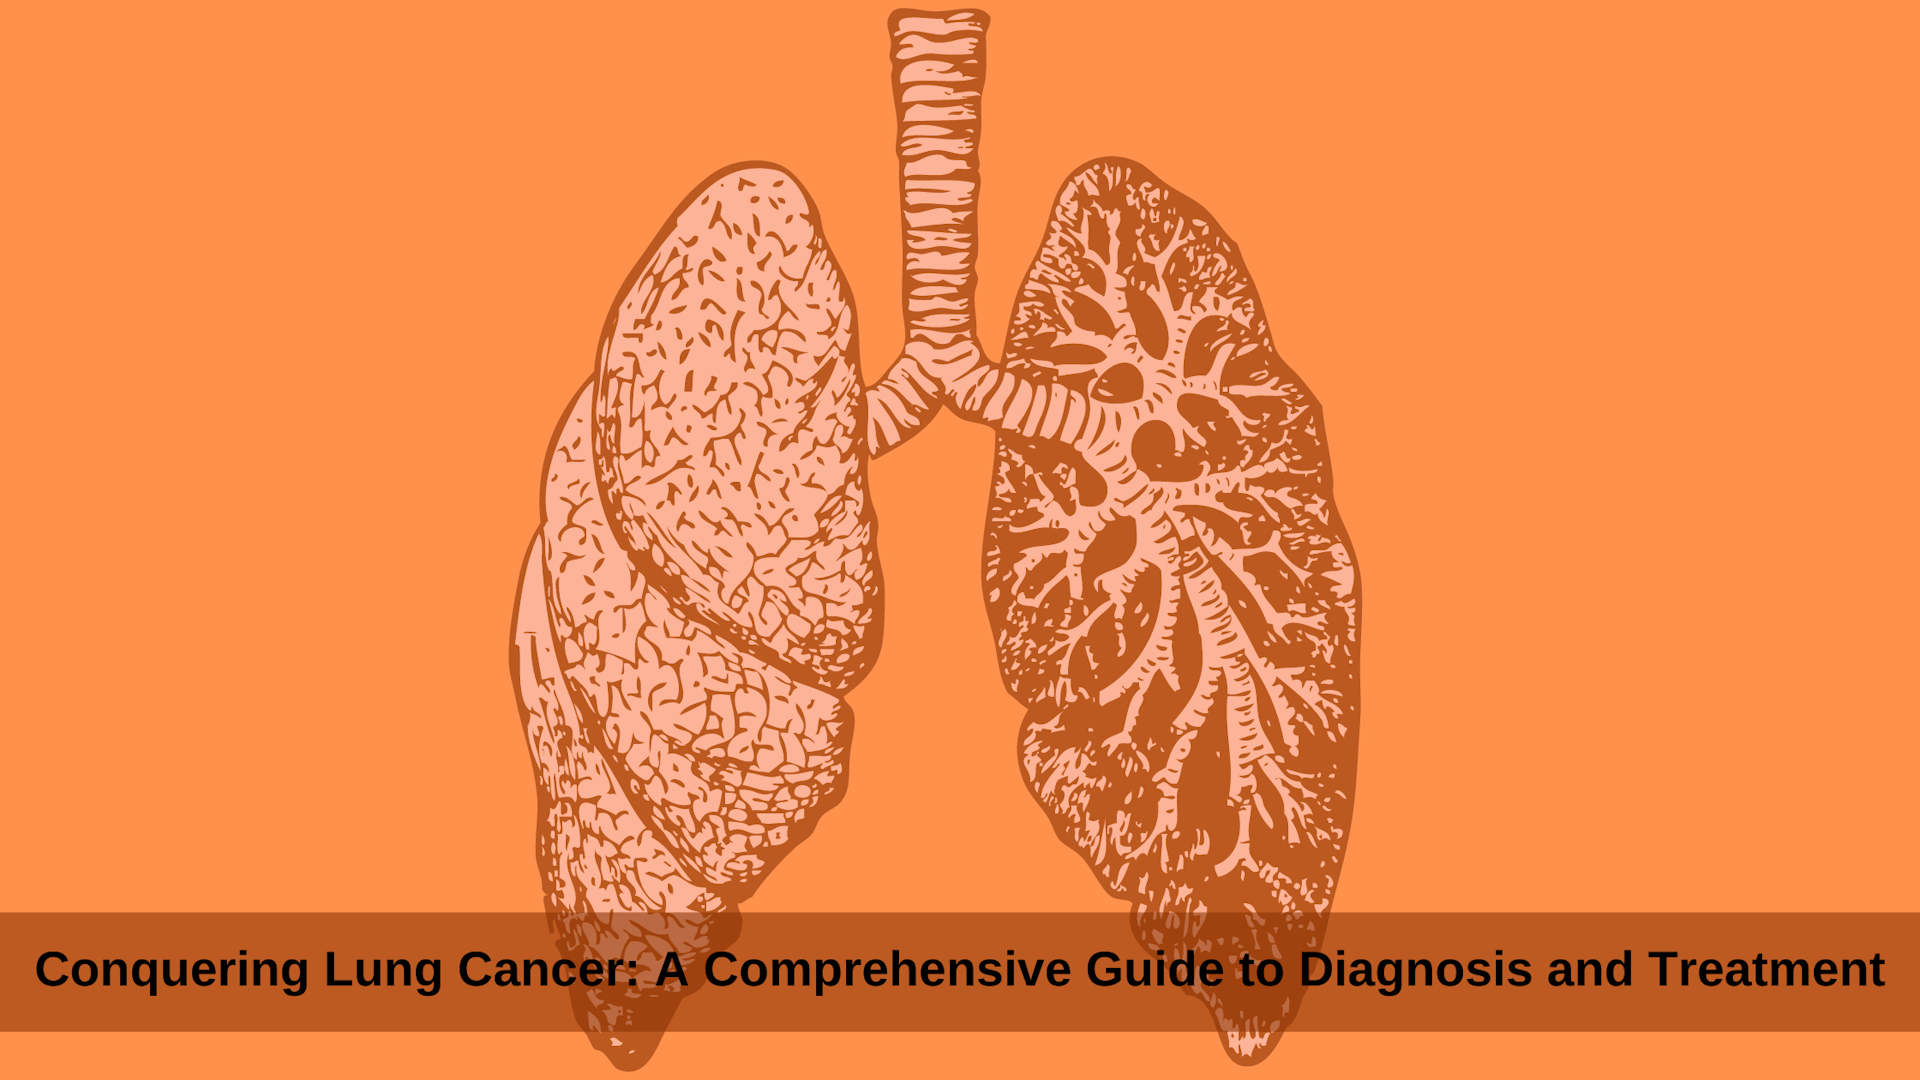 Conquering Lung Cancer: A Comprehensive Guide to Diagnosis and Treatment